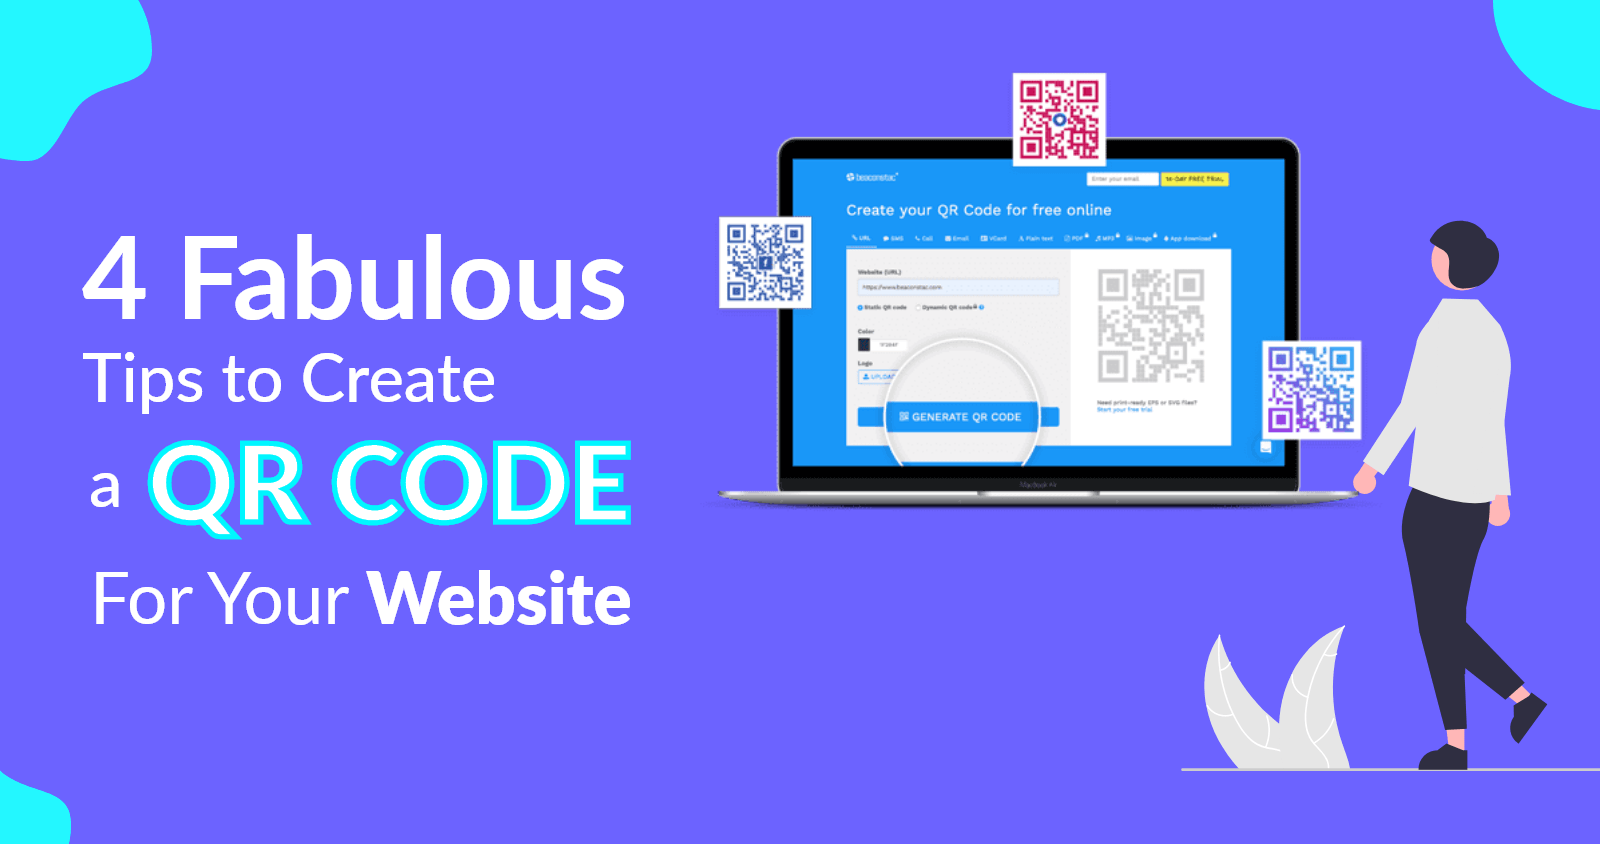 Create a QR Code For Your Website